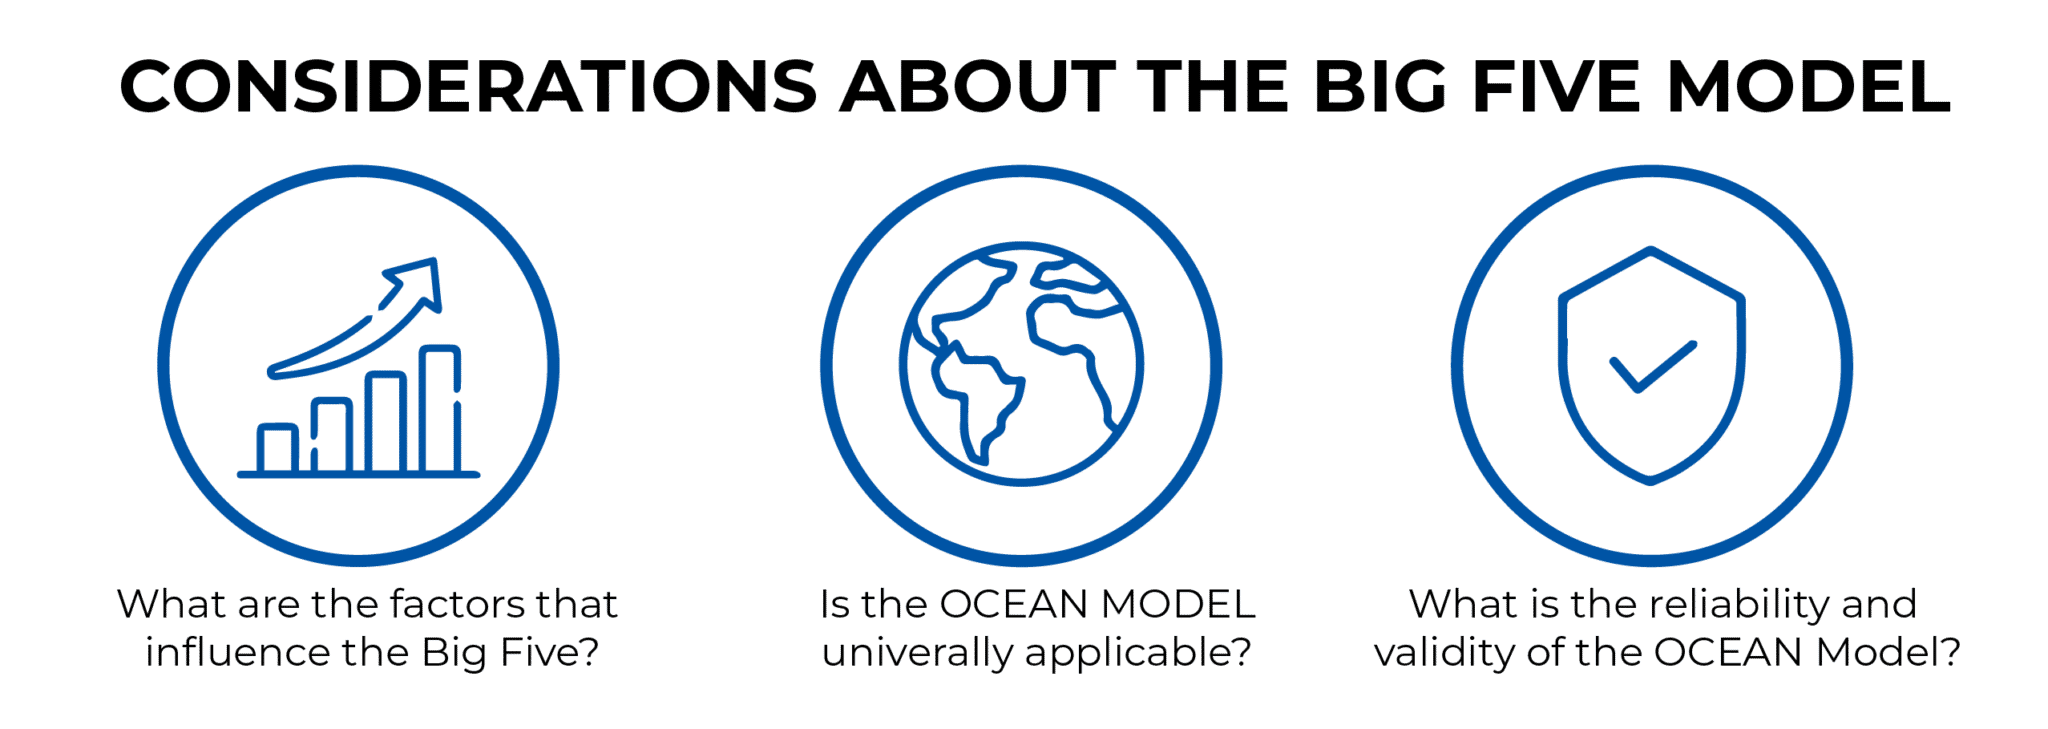 CONSIDERATIONS ABOUT THE BIG FIVE MODEL